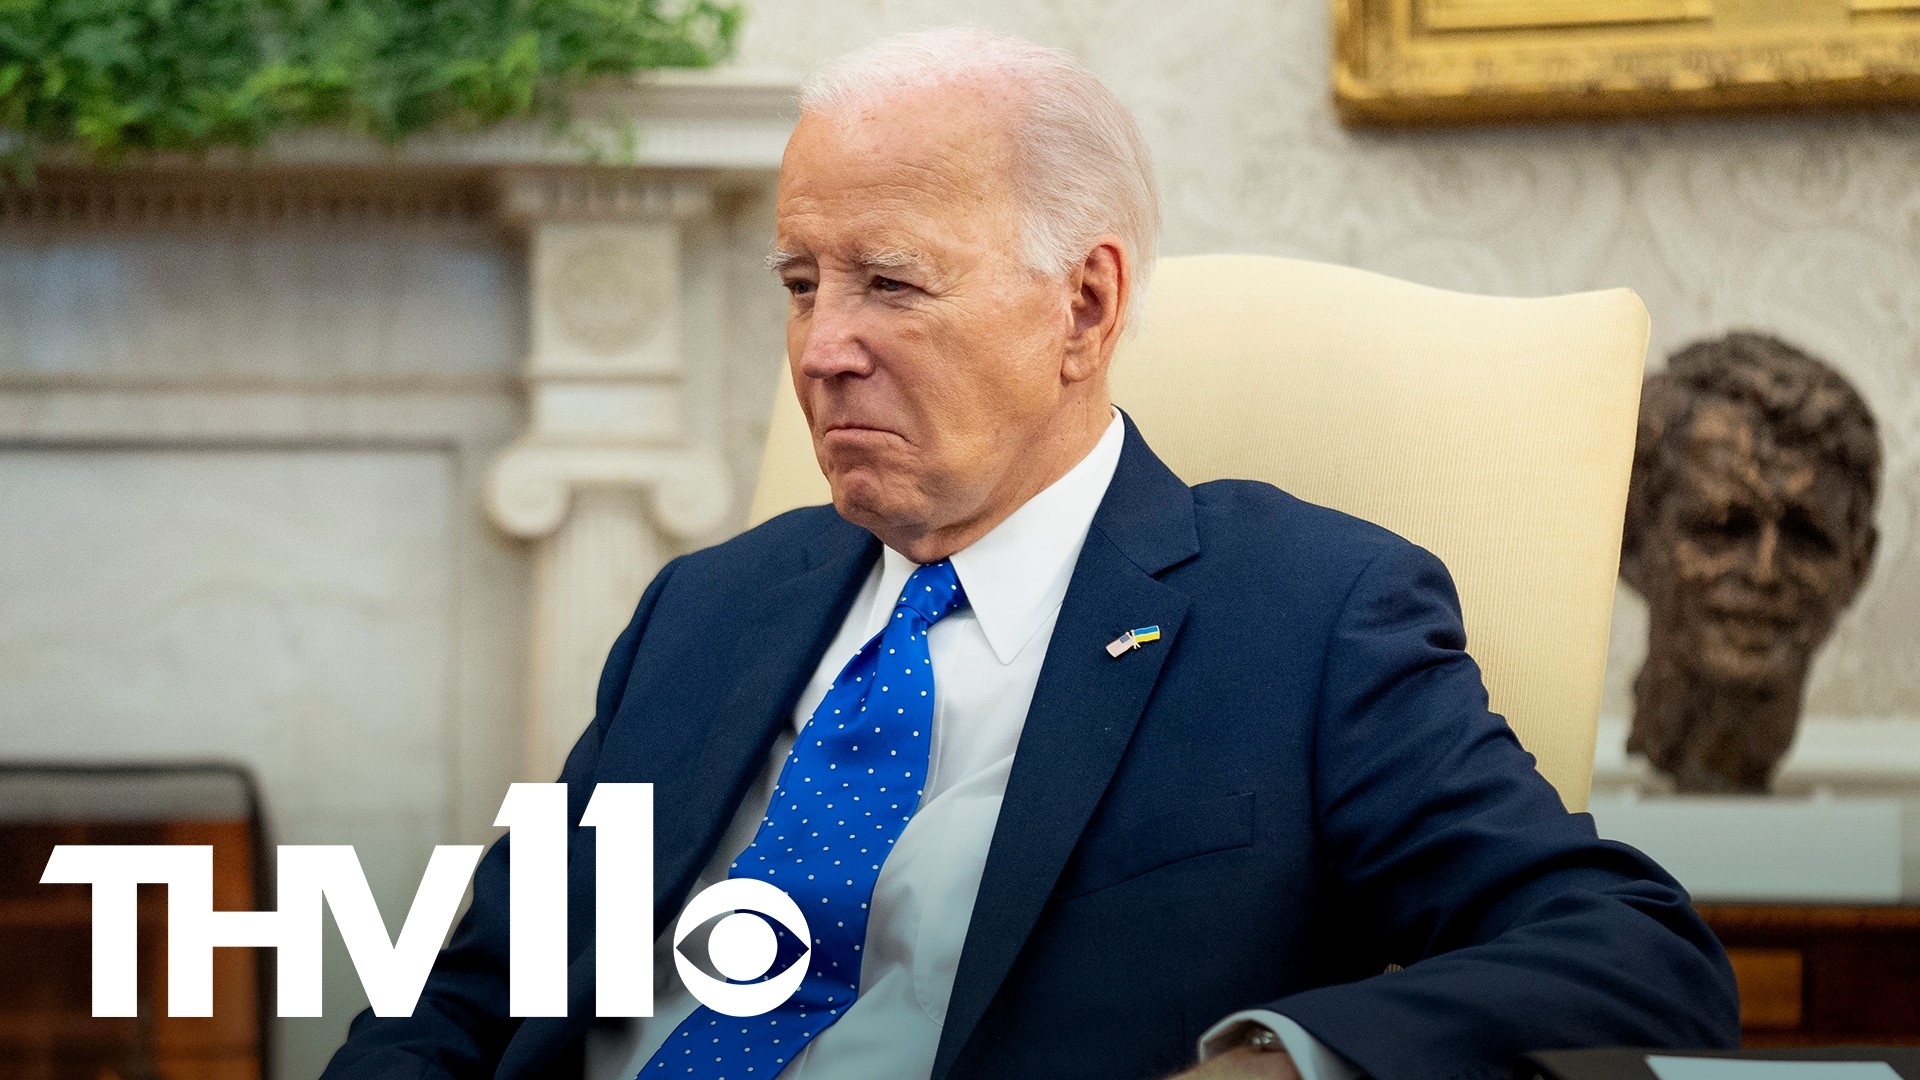 White House officials are working to quieten renewed discussion about President Joe Biden’s age after a Justice Department report called his memory into question.